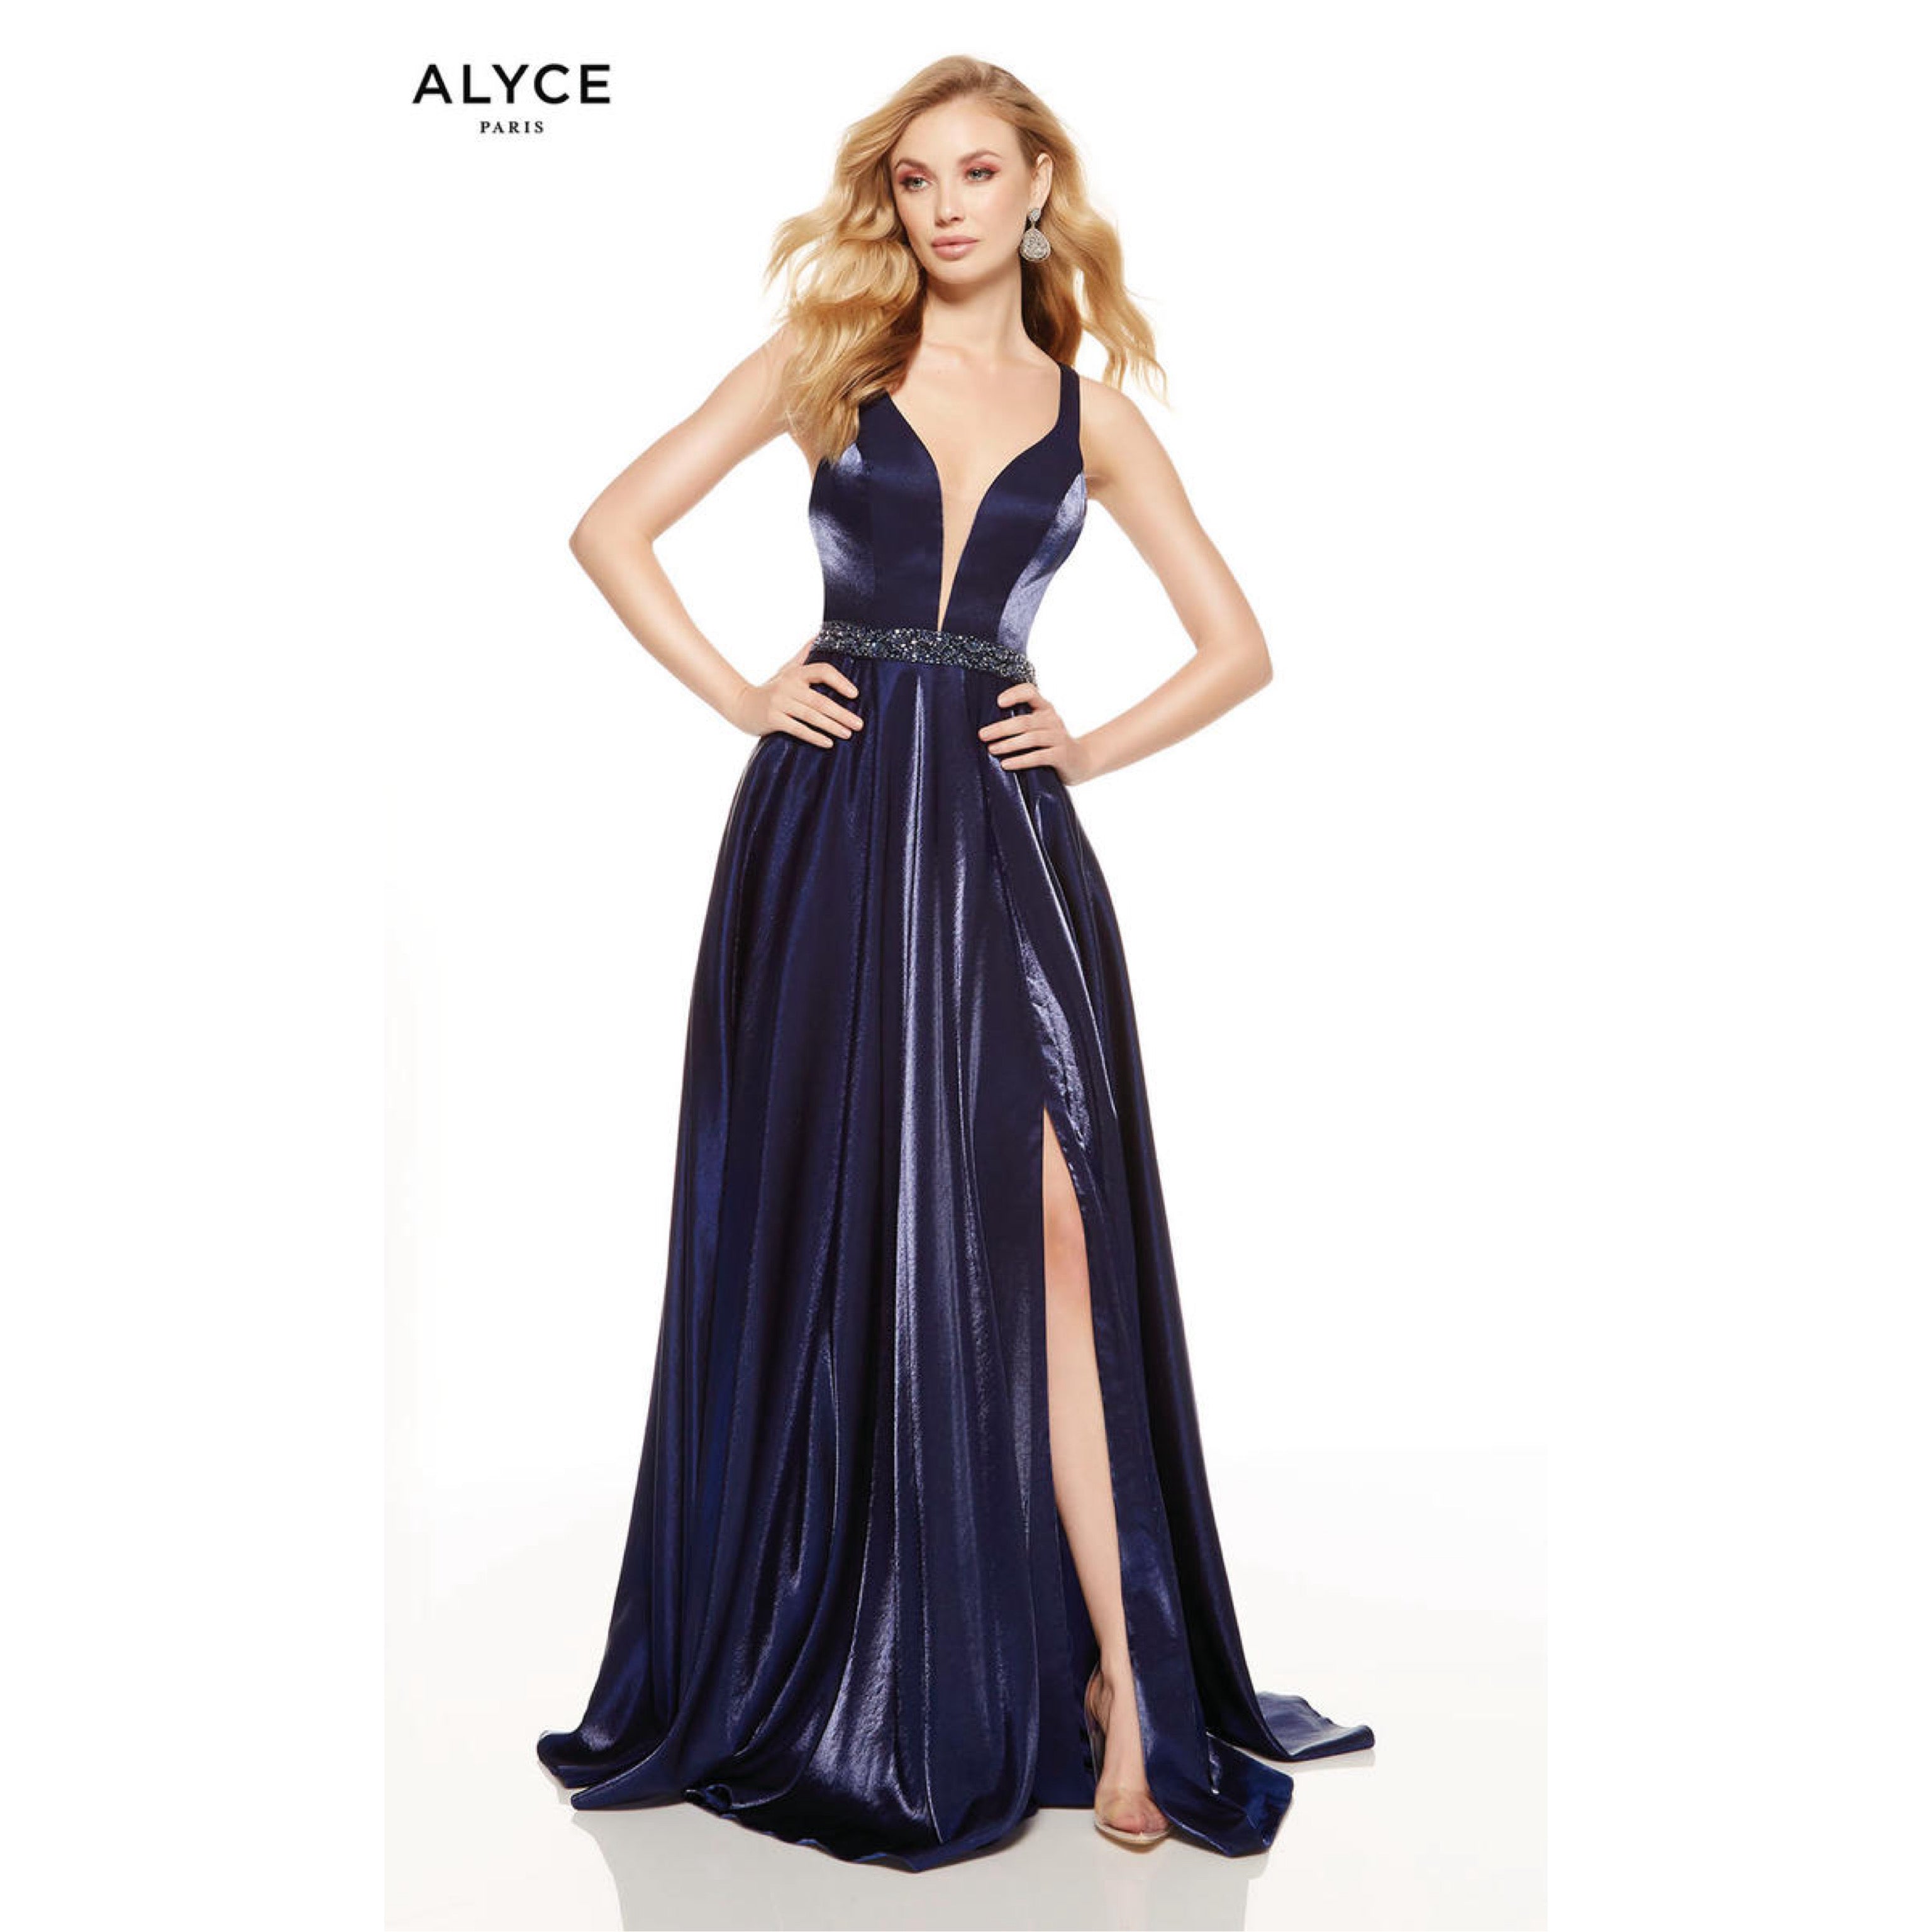 Alyce navy ballgown, size 2, NEW WITH TAGS!